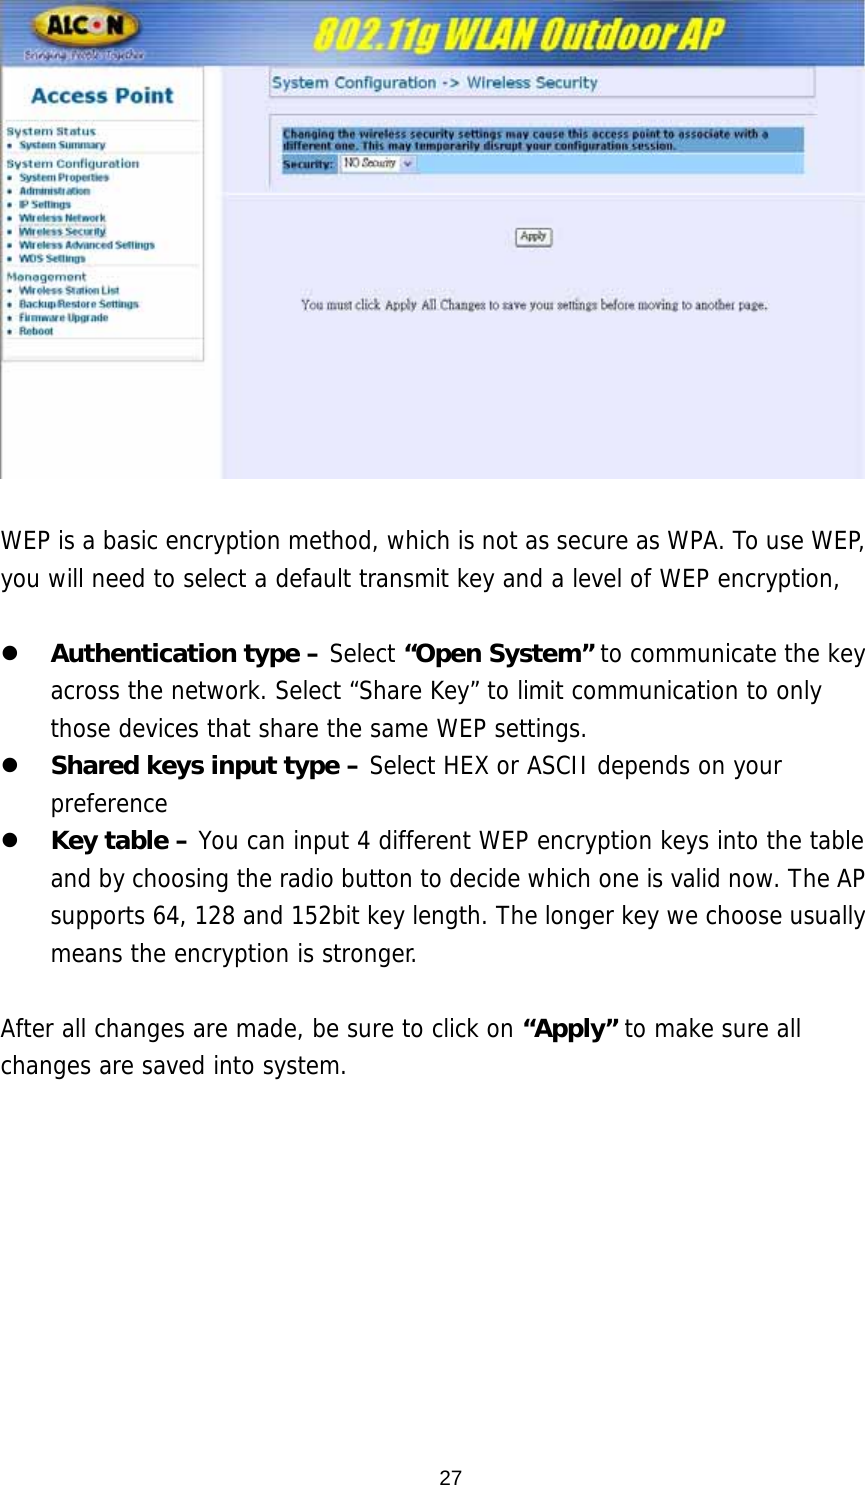   WEP is a basic encryption method, which is not as secure as WPA. To use WEP, you will need to select a default transmit key and a level of WEP encryption,   z Authentication type – Select “Open System” to communicate the key across the network. Select “Share Key” to limit communication to only those devices that share the same WEP settings.  z Shared keys input type – Select HEX or ASCII depends on your preference z Key table – You can input 4 different WEP encryption keys into the table and by choosing the radio button to decide which one is valid now. The AP supports 64, 128 and 152bit key length. The longer key we choose usually means the encryption is stronger.  After all changes are made, be sure to click on “Apply” to make sure all changes are saved into system.   27